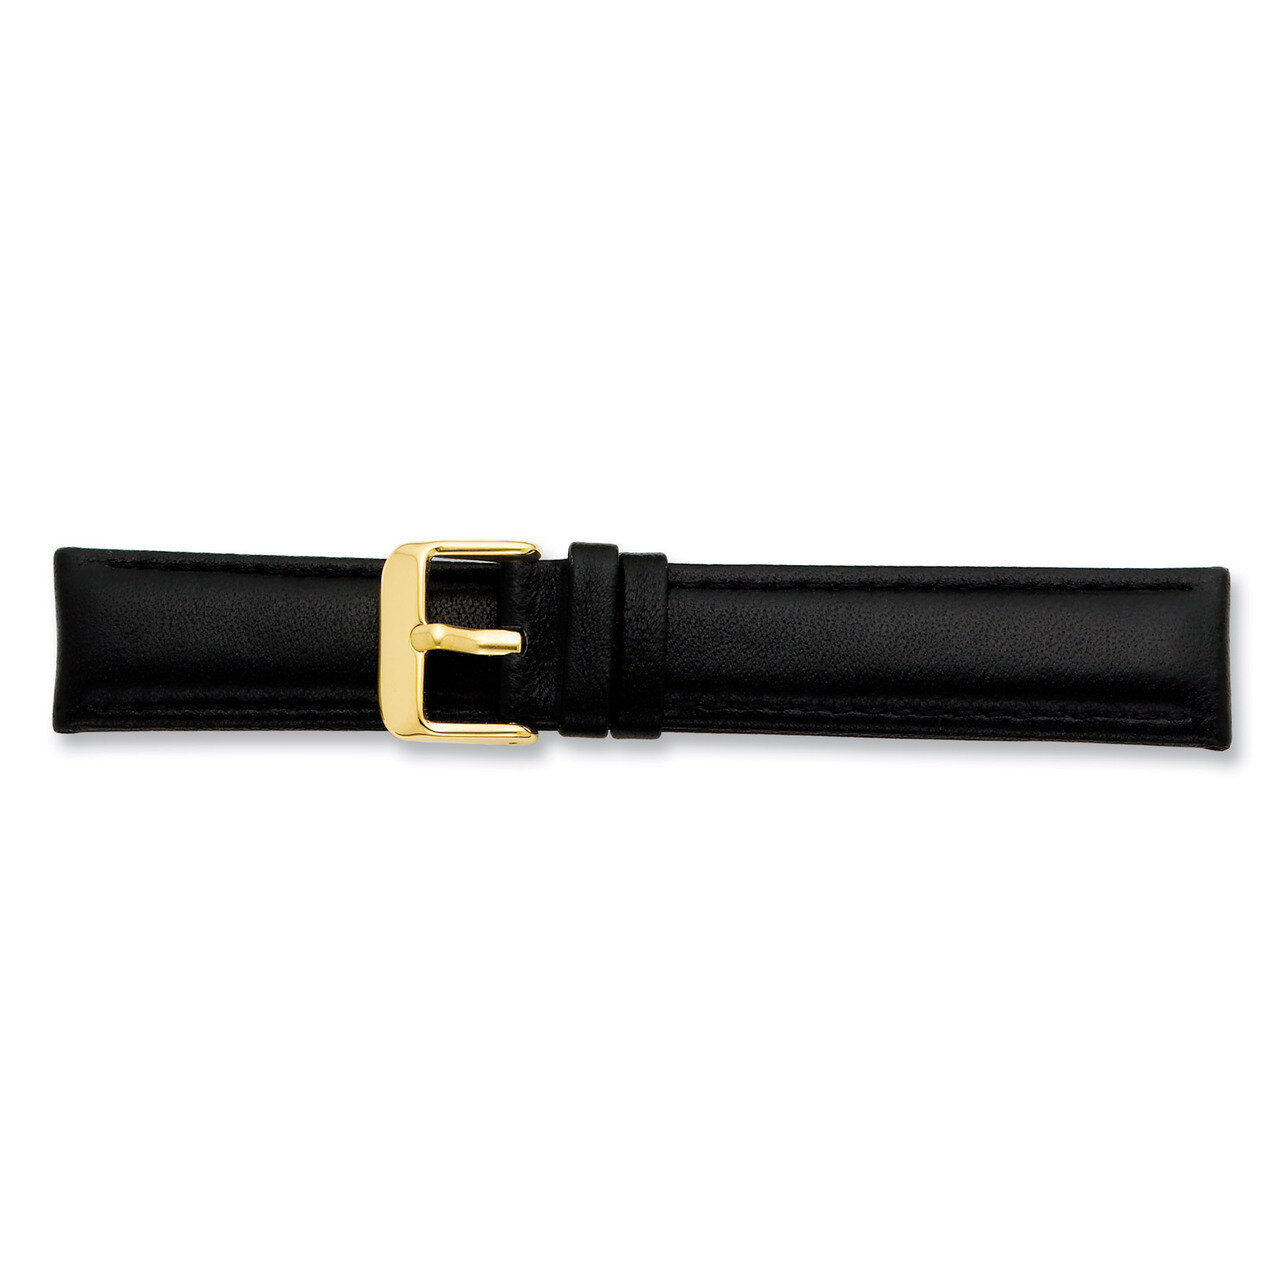 19mm Black Glove Leather Buckle Watch Band 7.75 Inch Gold-tone BA195-19